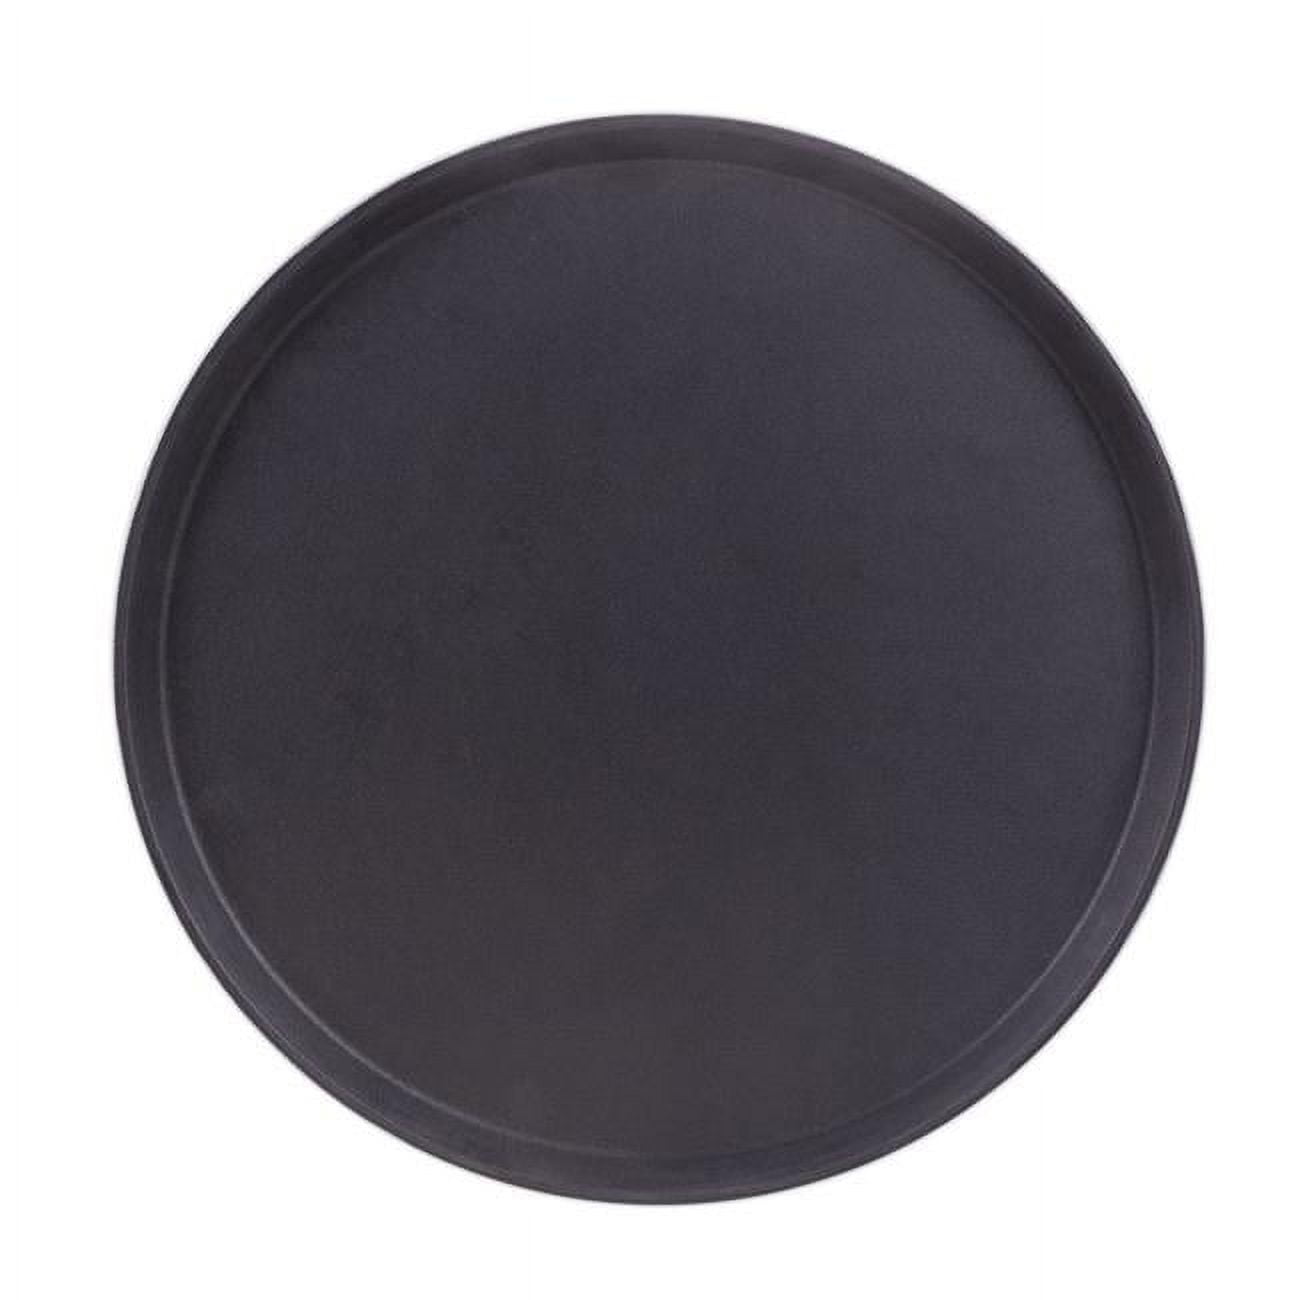 Kcaf-001 11 In. Round Rubber-lined Serving Tray